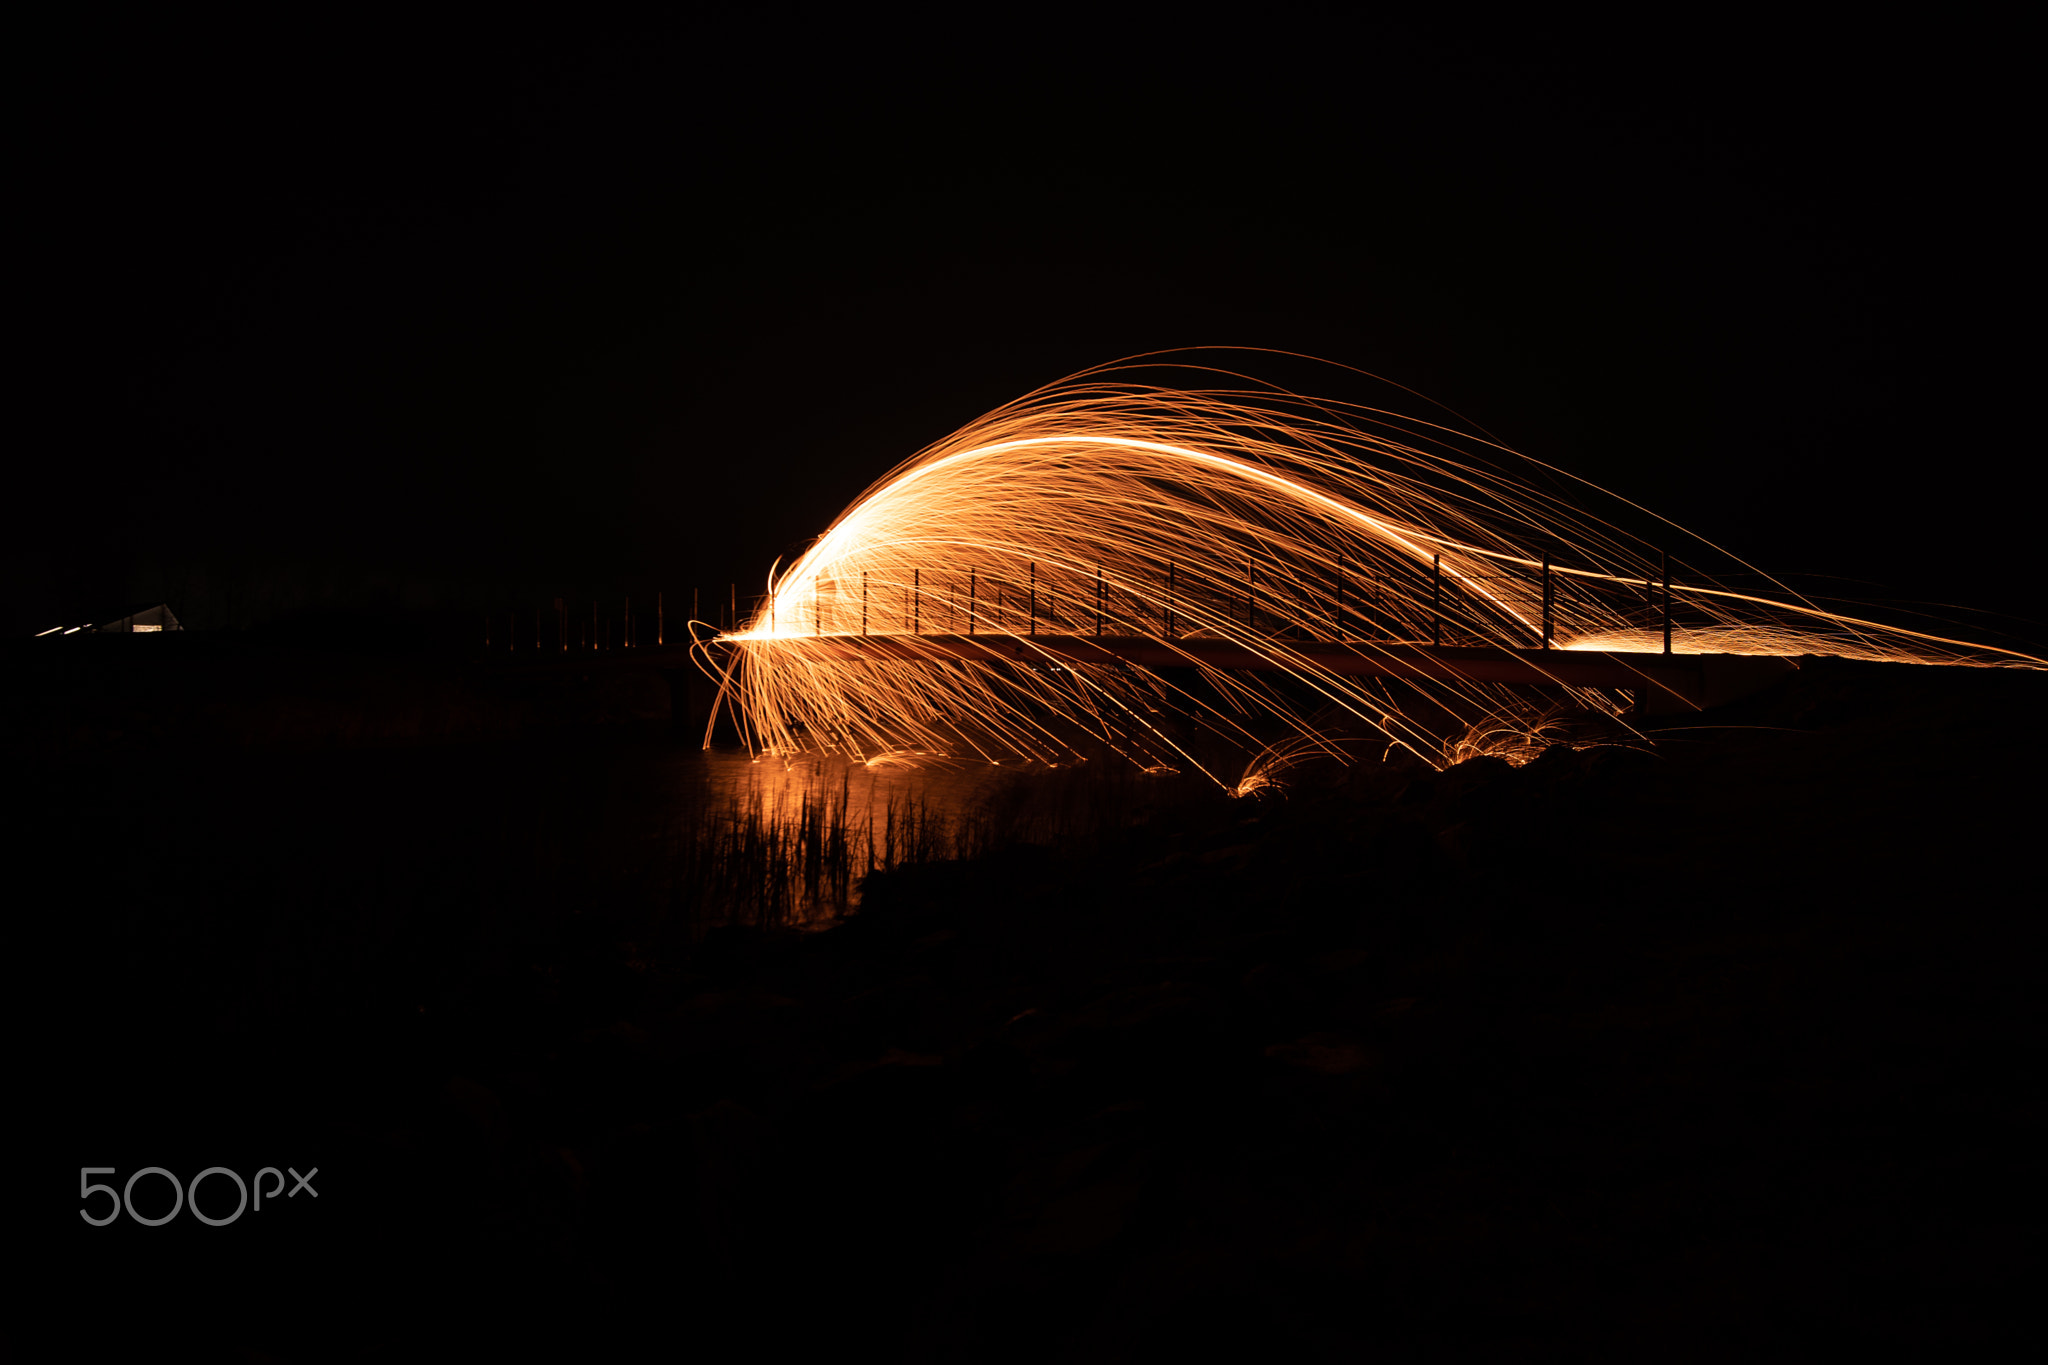 Lightpainting with burning steel wool in the night